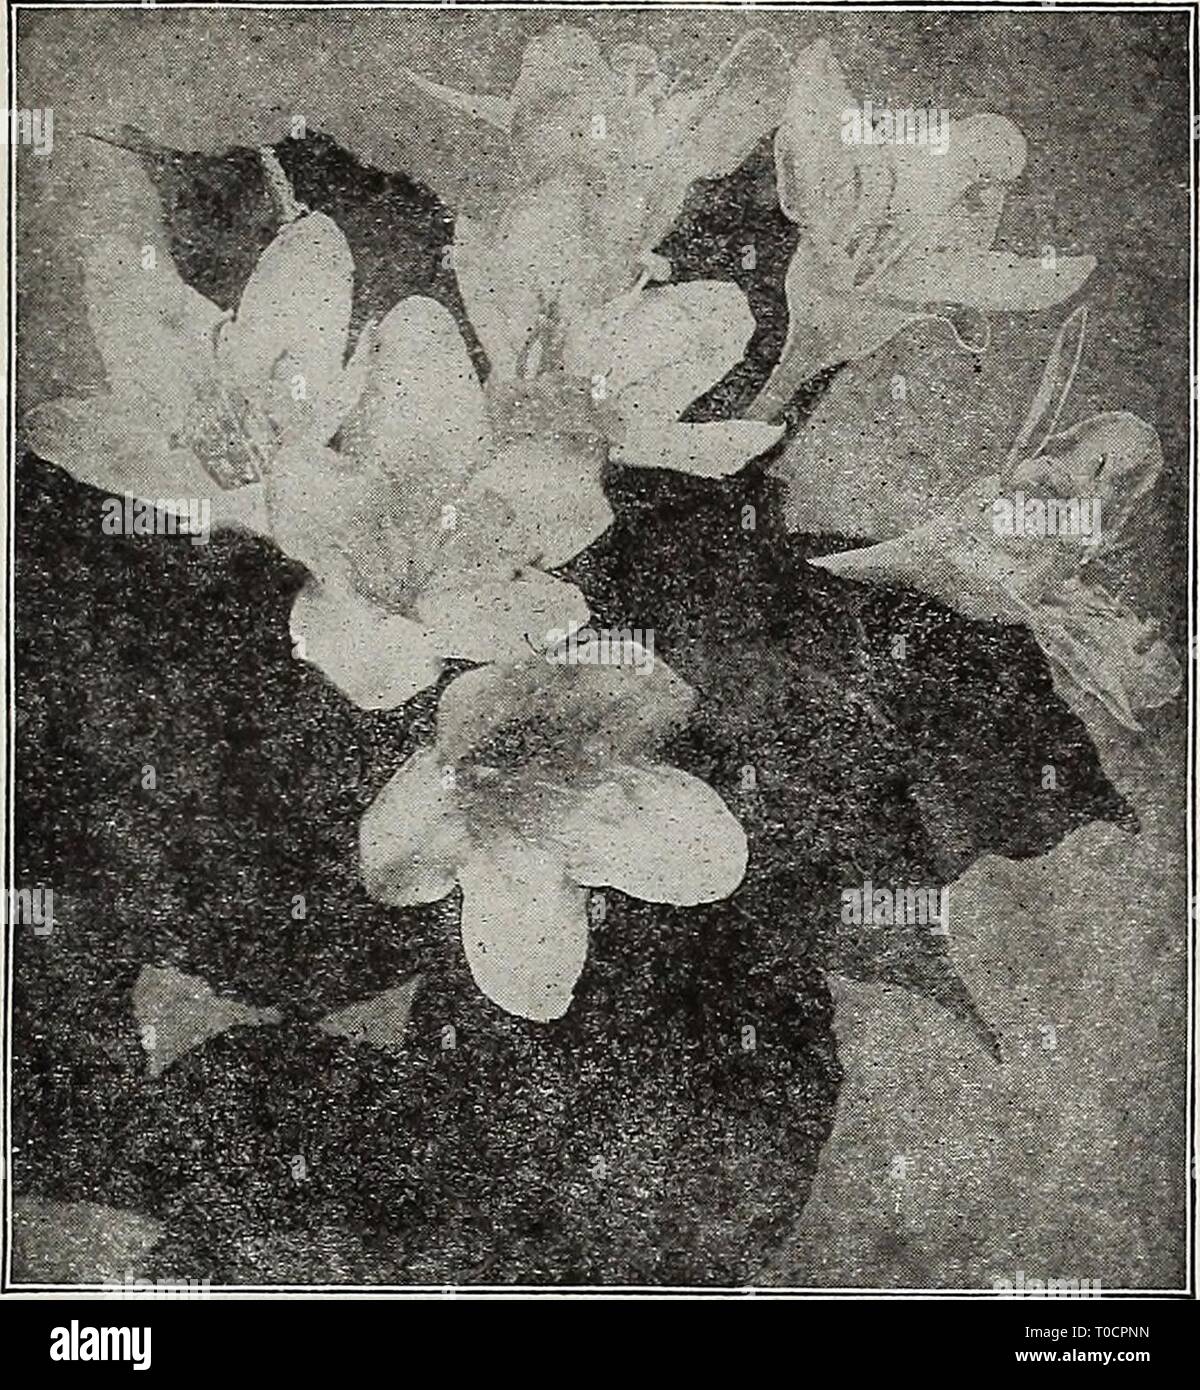 Dreer's garden book 1917 (1917) Dreer's garden book 1917 dreersgardenbook1917henr Year: 1917  CHOICE HARDY5MRUBS 255    Weigelia Rosea Weigelia Candida. Fine pure white; flowers of large size. 30 cts. each. — Rosea. Soft rosy carmine. 30 cts. each. — Rosea Nana Variegata. Beautiful, clearly defined varie- gation of green, yellow and pink in its leaves; flowers delicate rose-pink. 30 cts. each. — Eva Rathke. The finest Weigelia in cultivation; flower- ing continuously throughout the summer and autumn; of a rich ruby carmine. 30 cts. each. NOTE.—Shrubs will be shipped on receipt of orders or as  Stock Photo